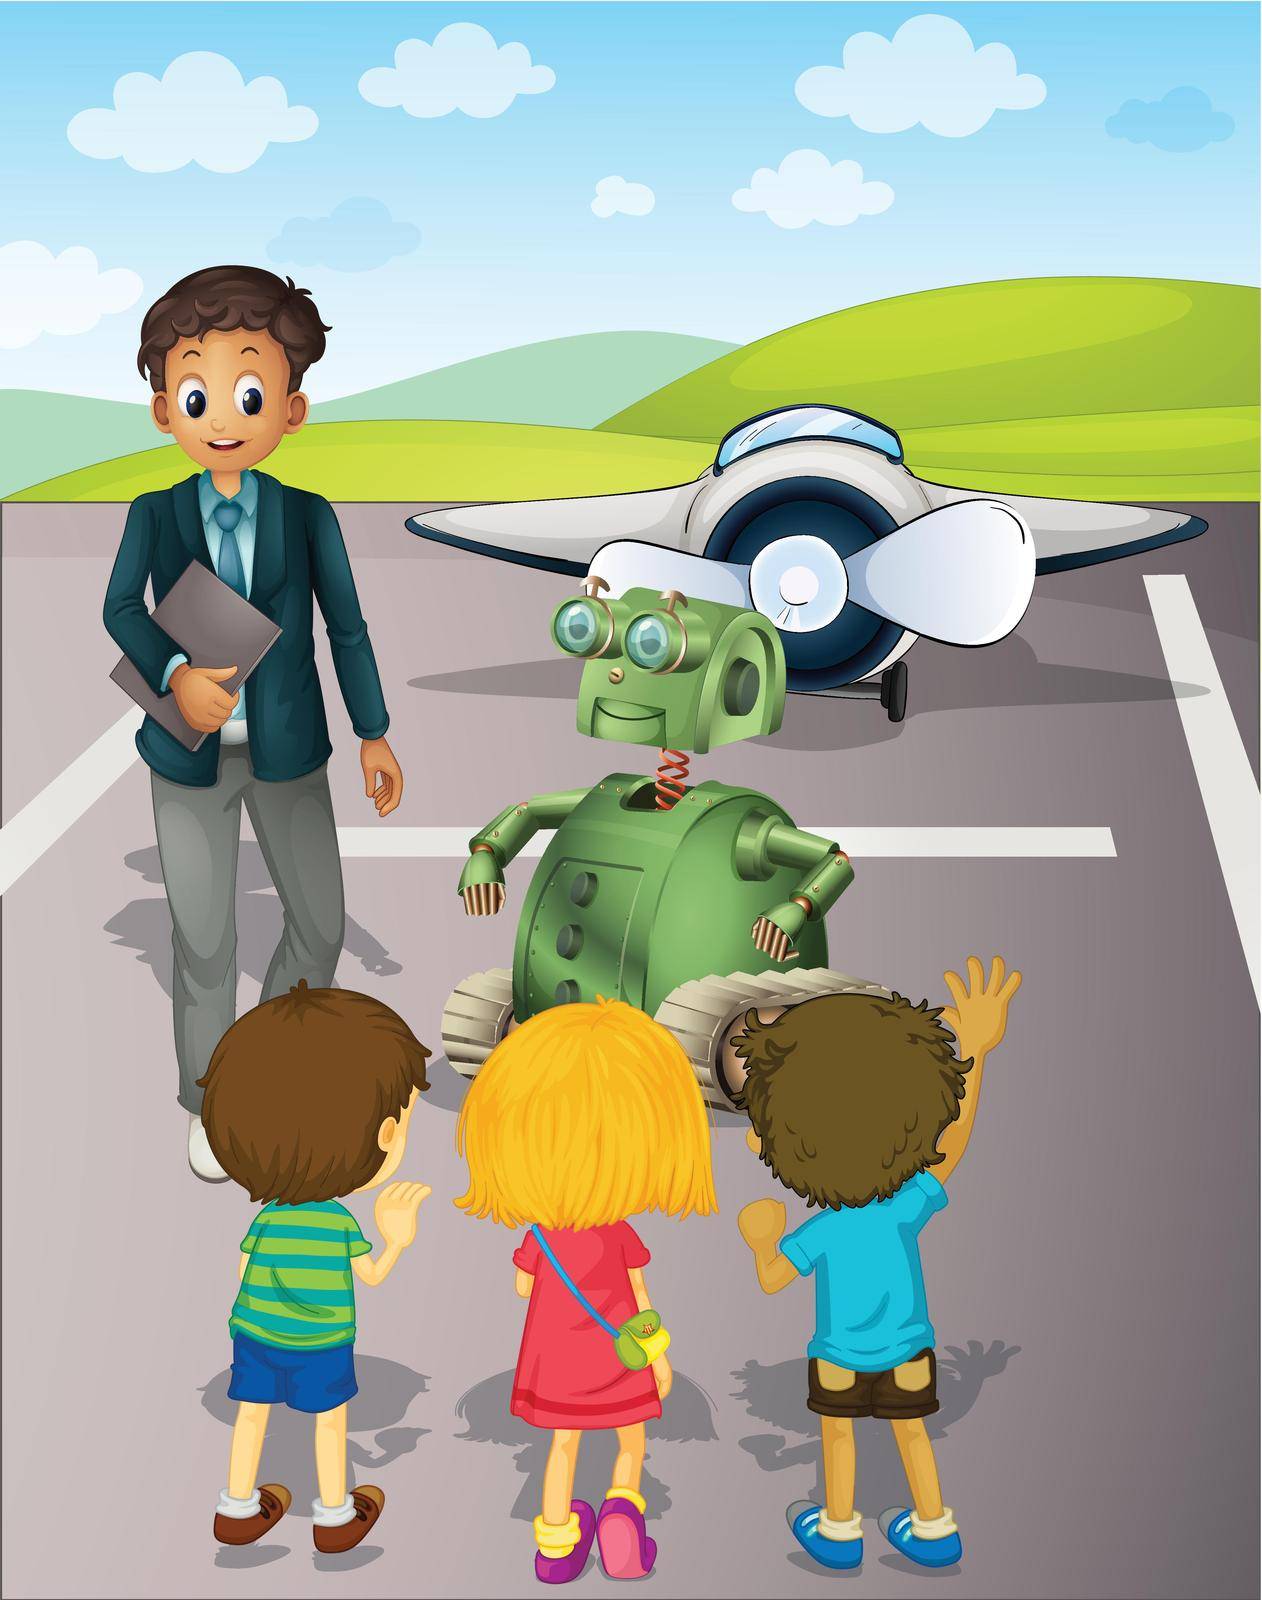 Illustration of kids at the airport